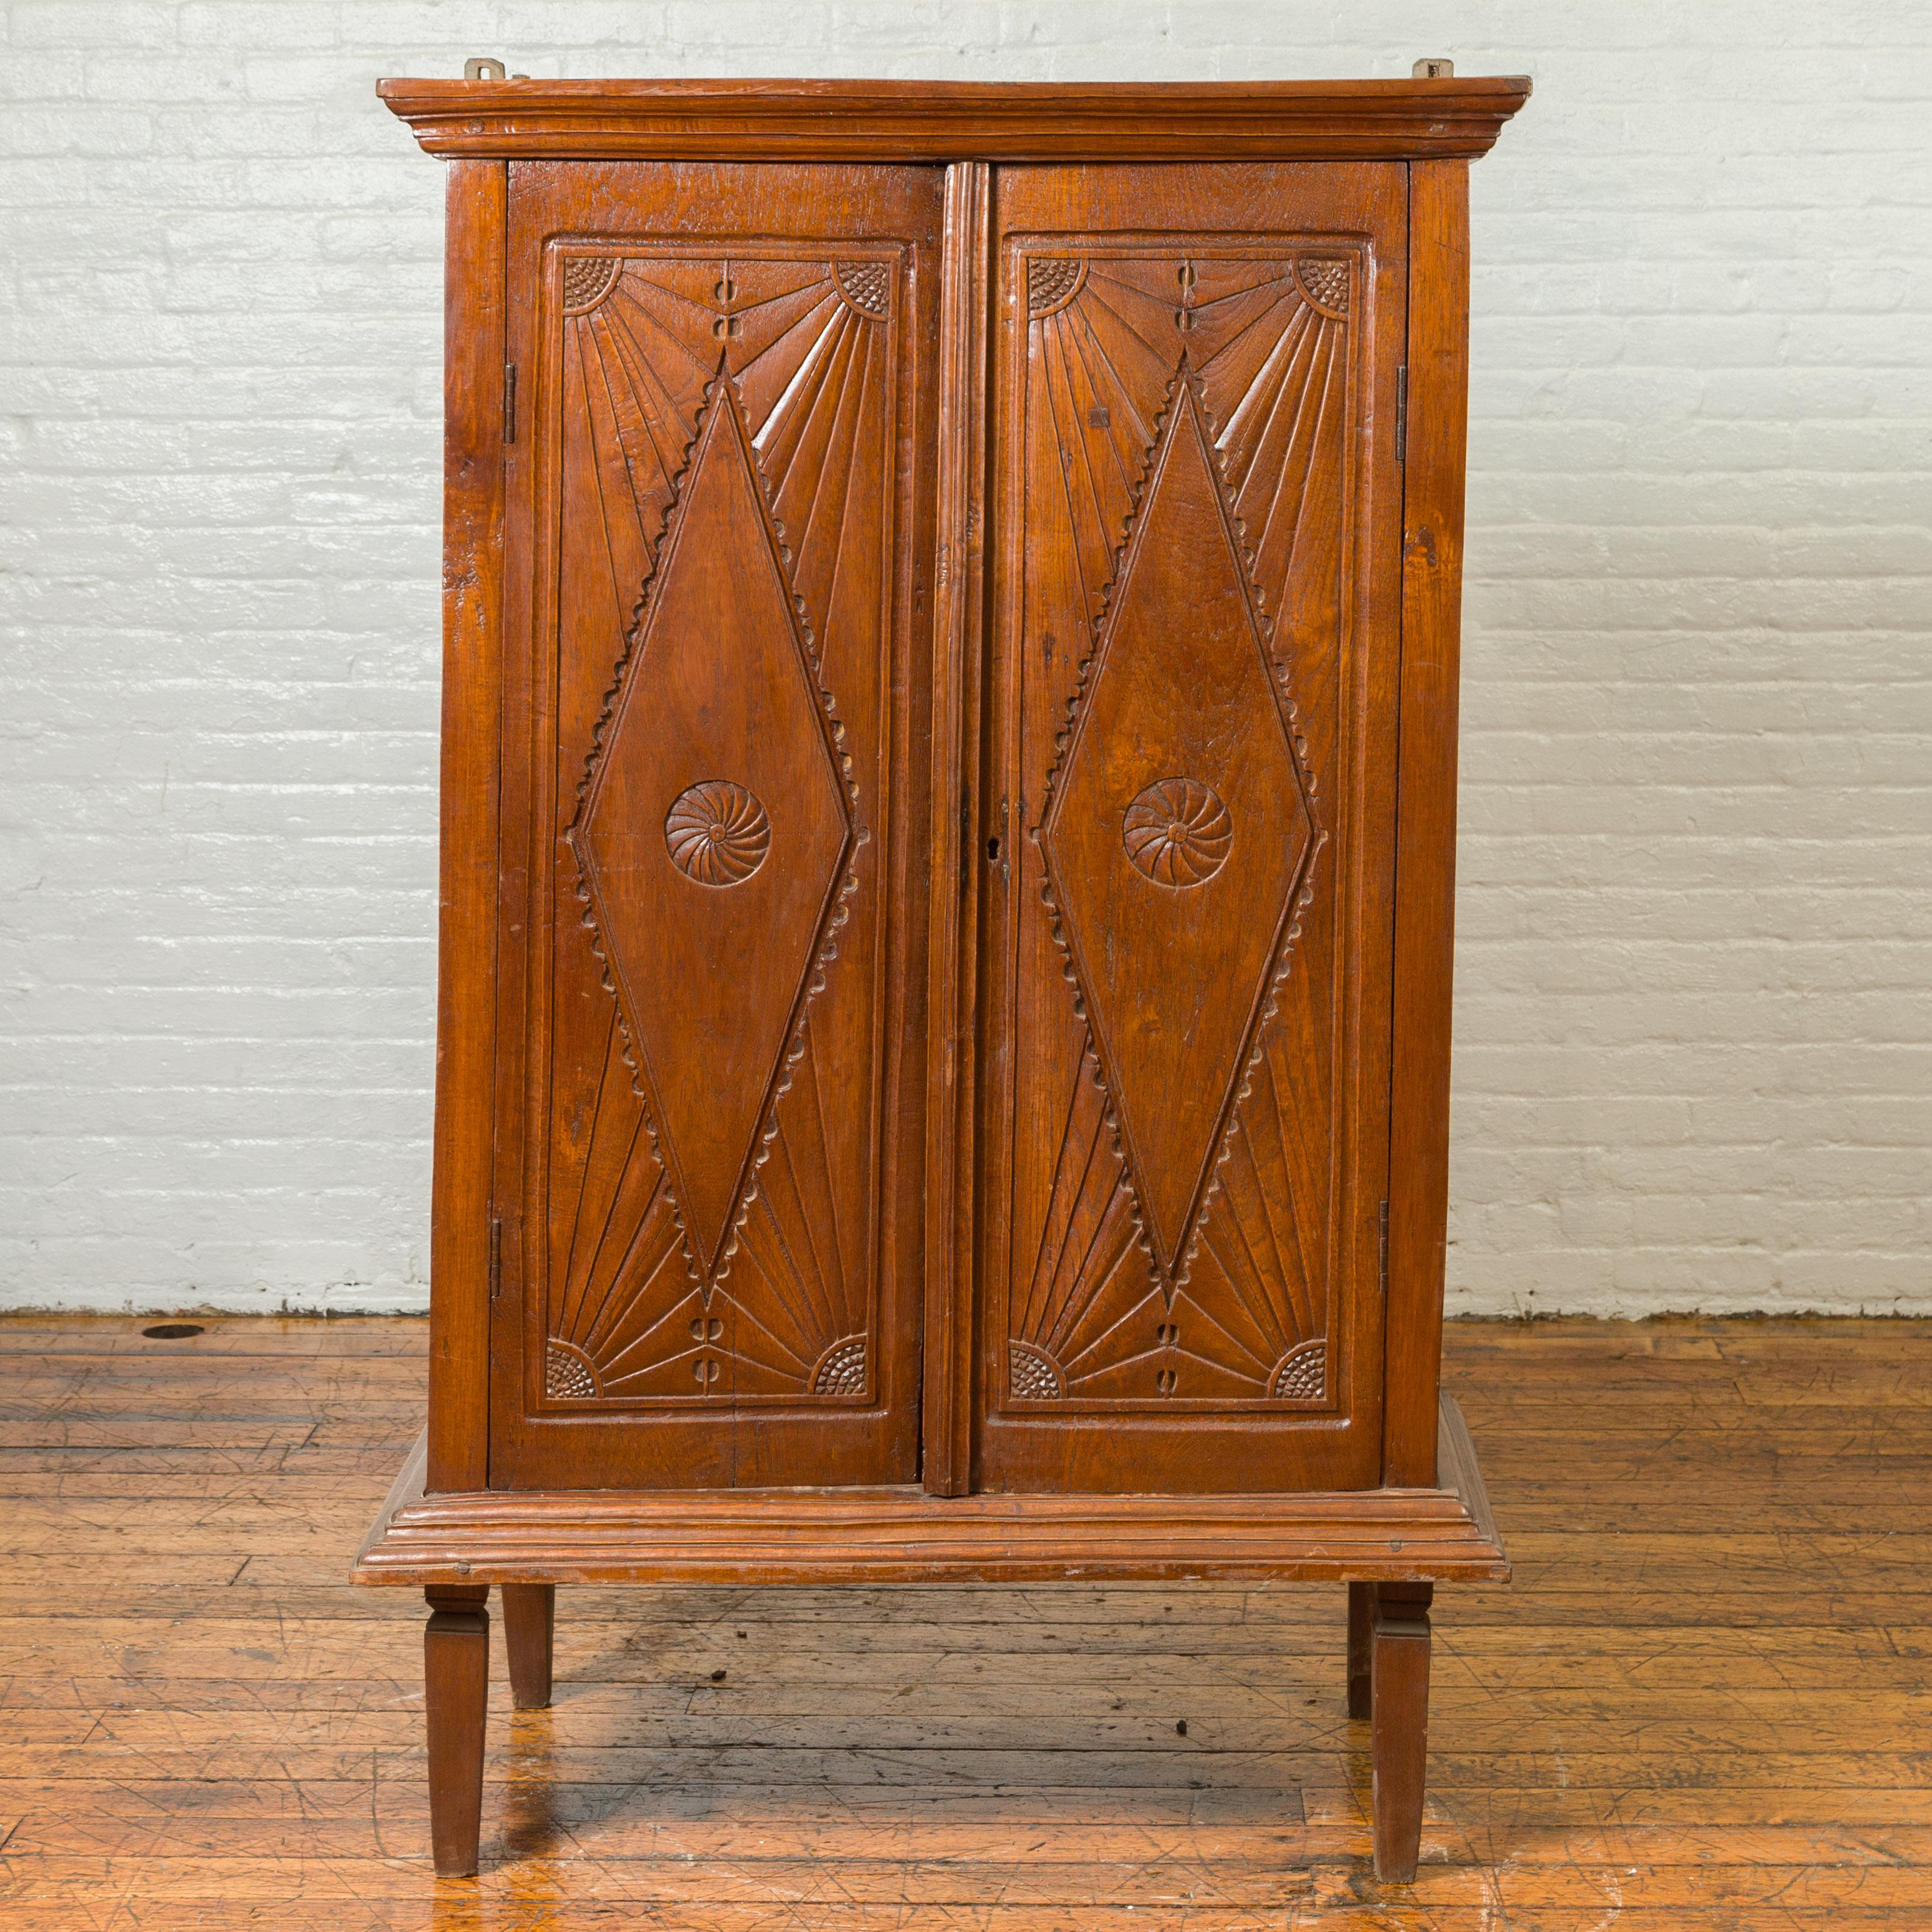 A Dutch Colonial wooden cabinet from the 19th century, with carved doors, diamonds and radiating motifs. Immerse yourself in the historical depth and artistic beauty of this 19th-century Dutch Colonial wooden cabinet, an artifact that harmoniously